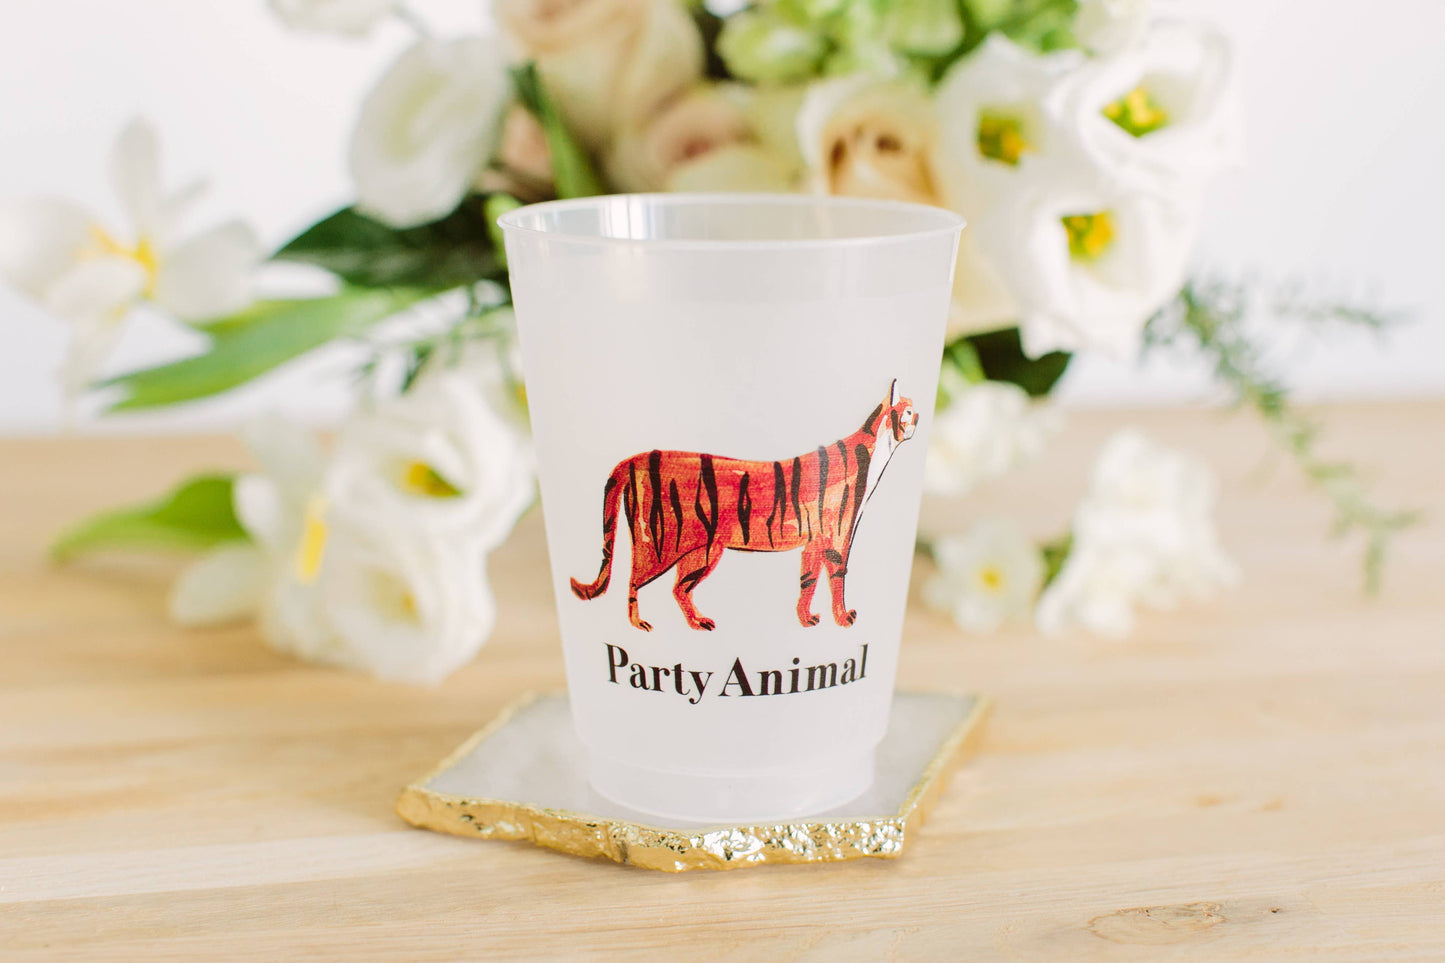 Set of 6 Reusable Cups: Party Animal Tiger